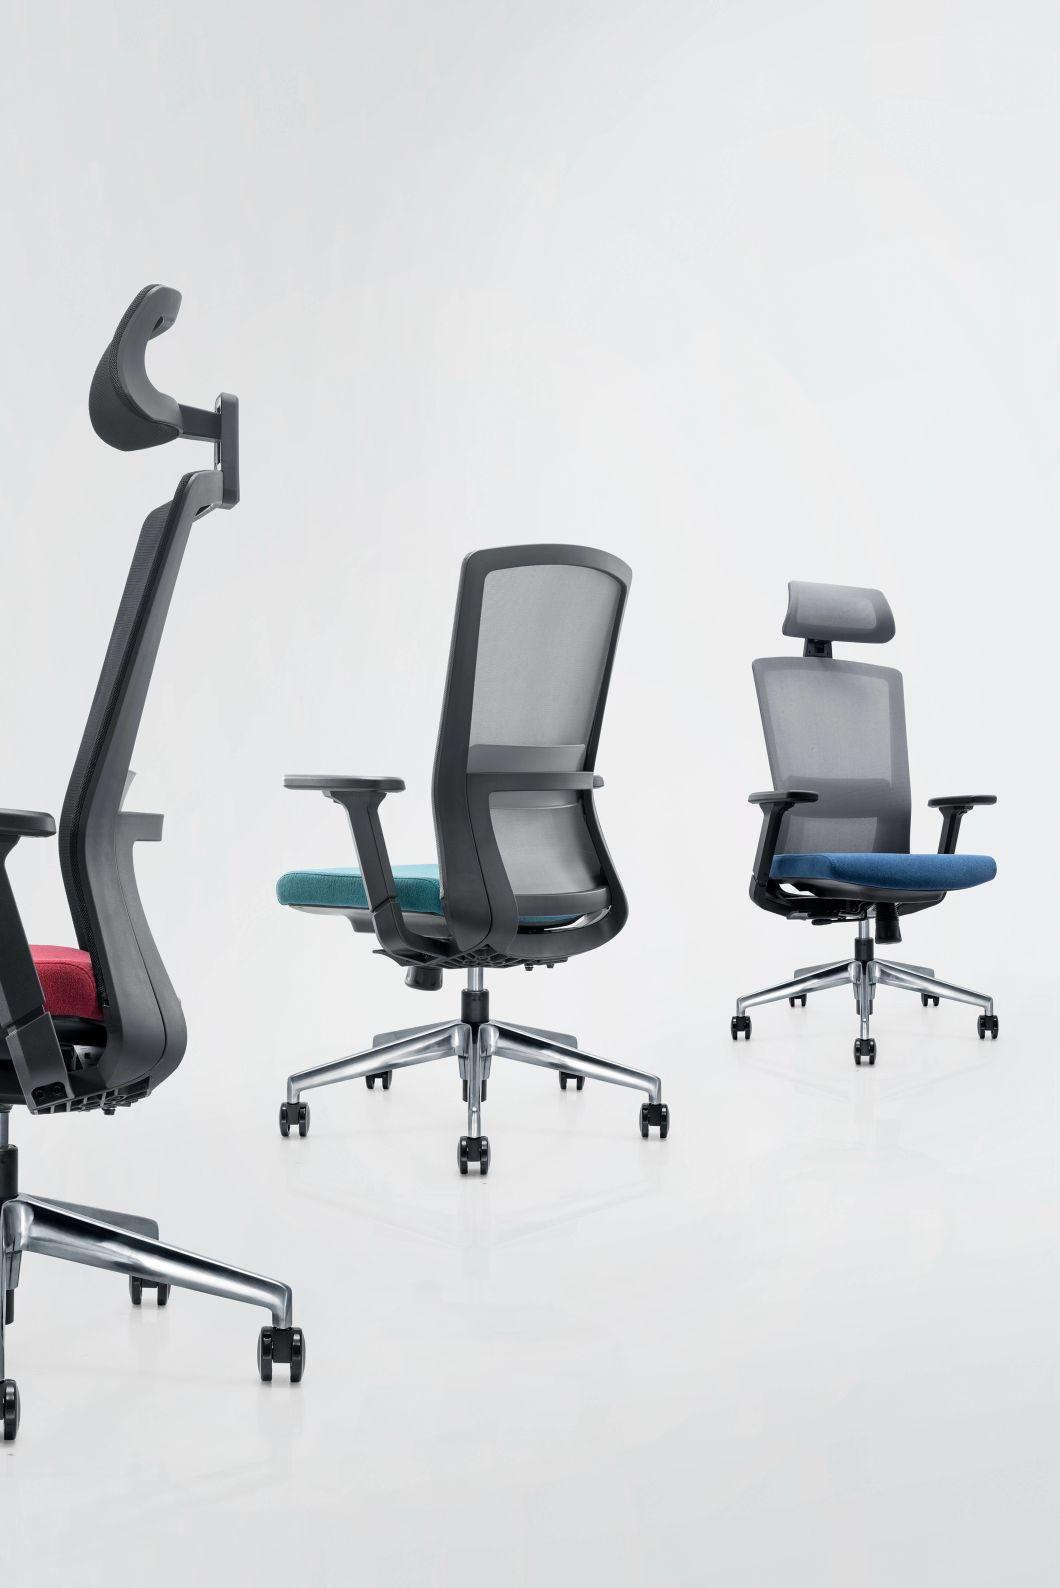 High Performance Customized Foshan Meeting Revolve Staff Seating Fabric Chair Office Furniture